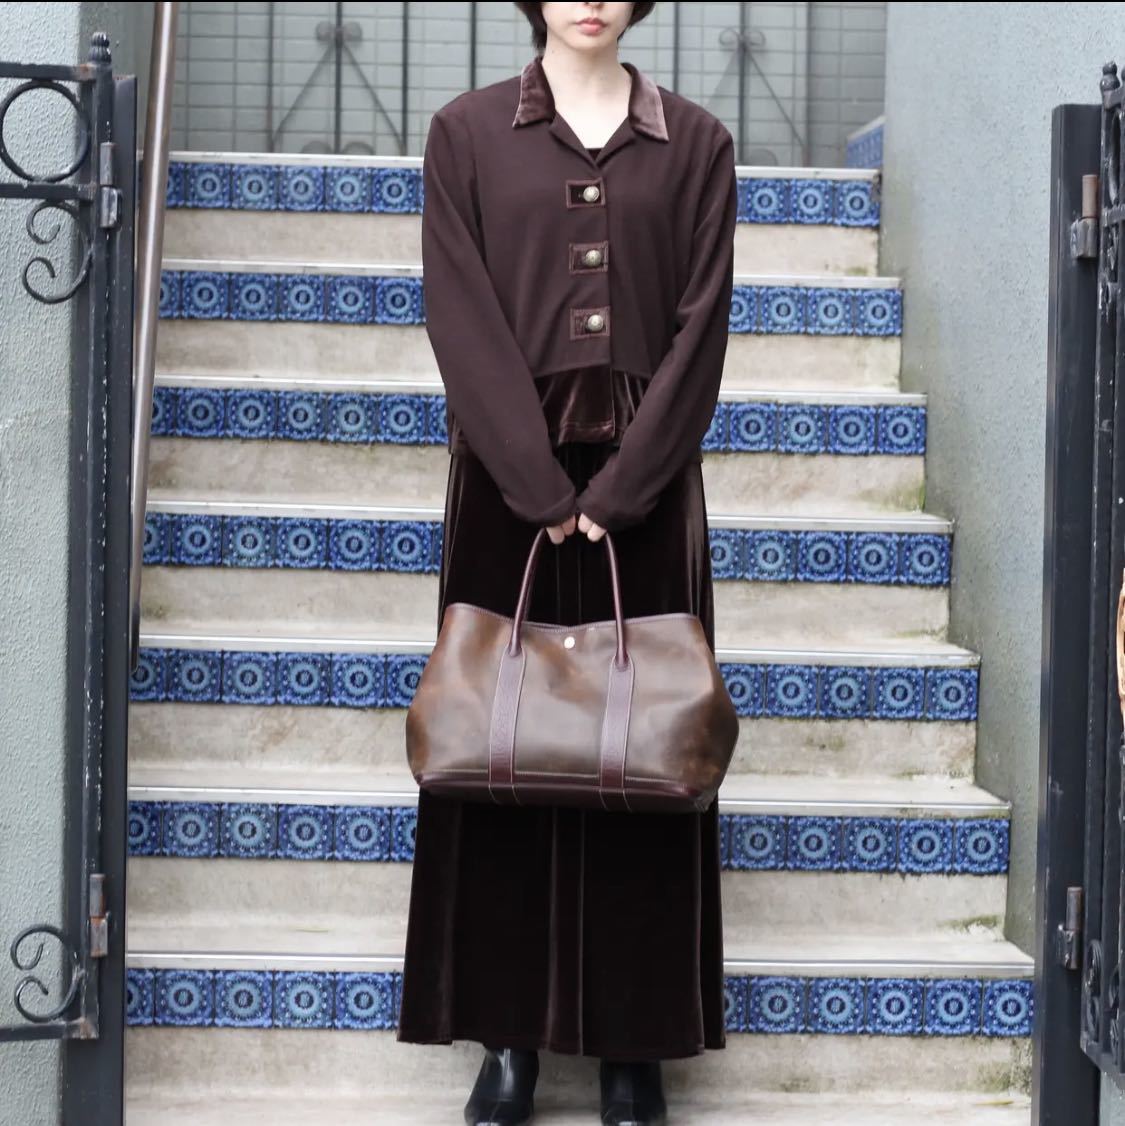 HERMES LEATHER TOTE BAG MADE IN FRANCE/エルメスガーデンパーティーレザートートバッグ